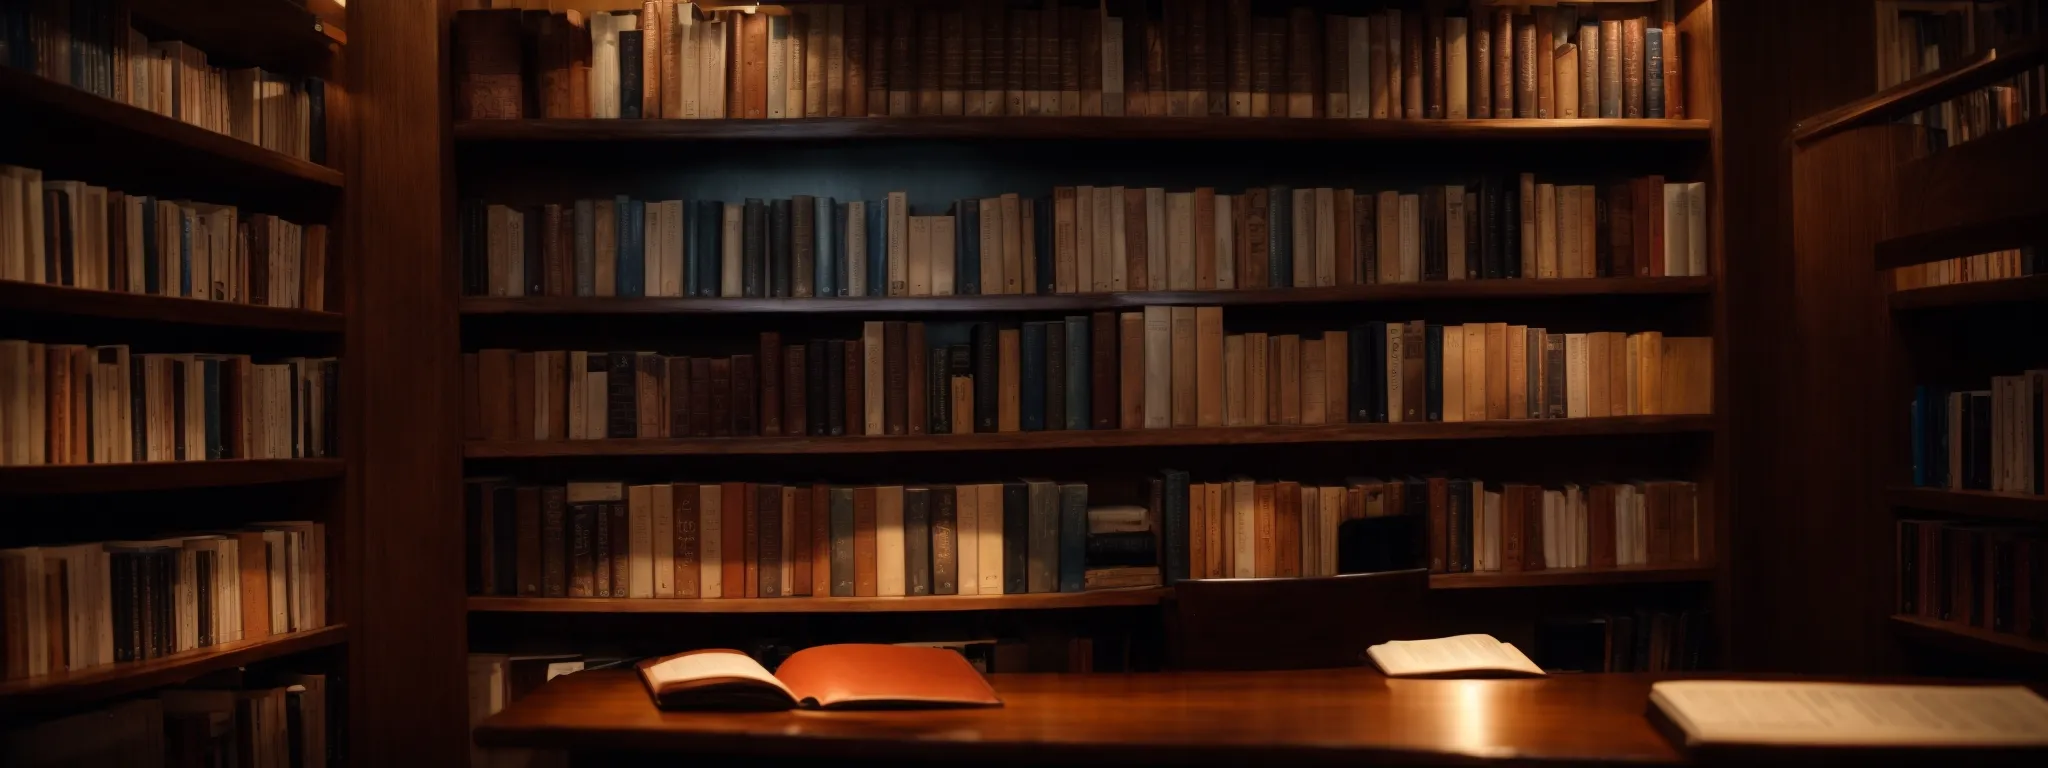 a well-organized library with seo books on a wooden desk, illuminated softly by the glow of an overhead reading lamp.